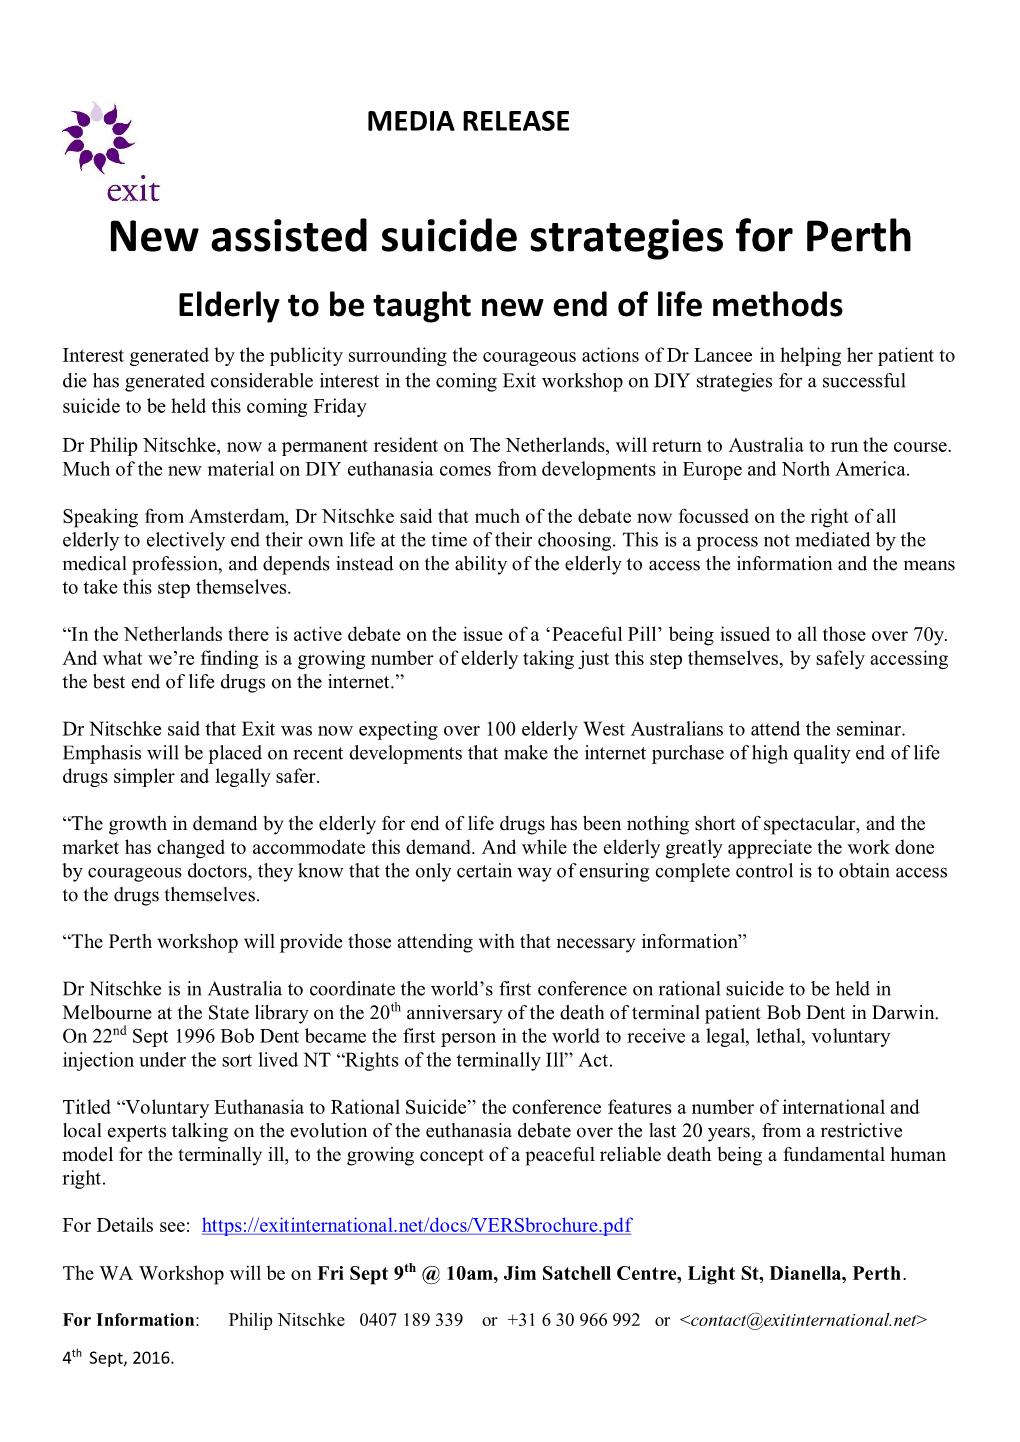 New Assisted Suicide Strategies for Perth